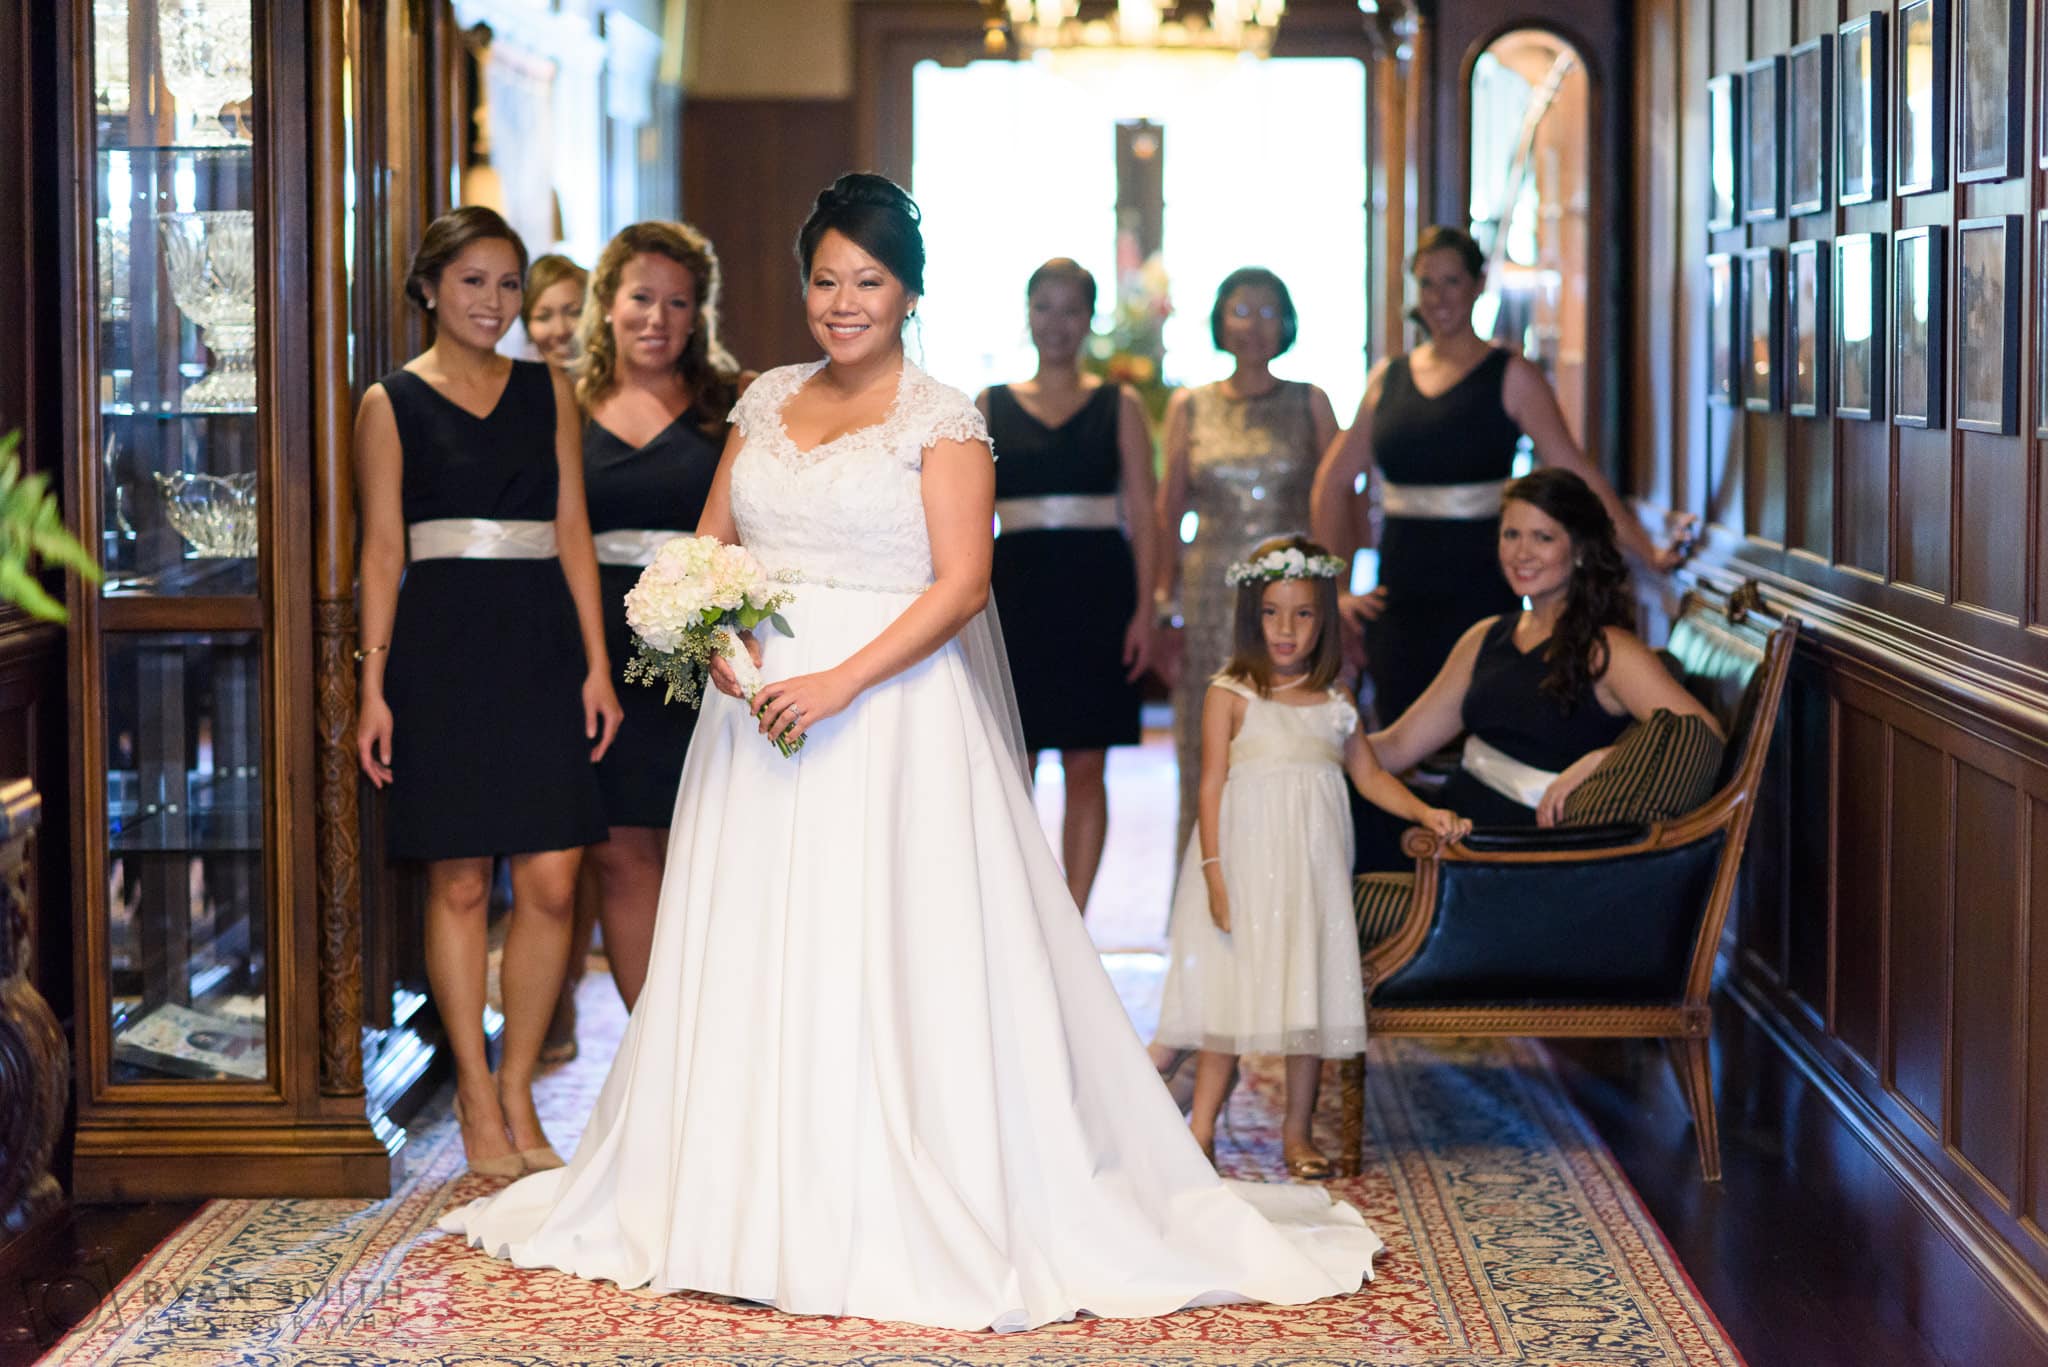 Bride and bridesmaids in the hallway - Dye Club at Barefoot Resort